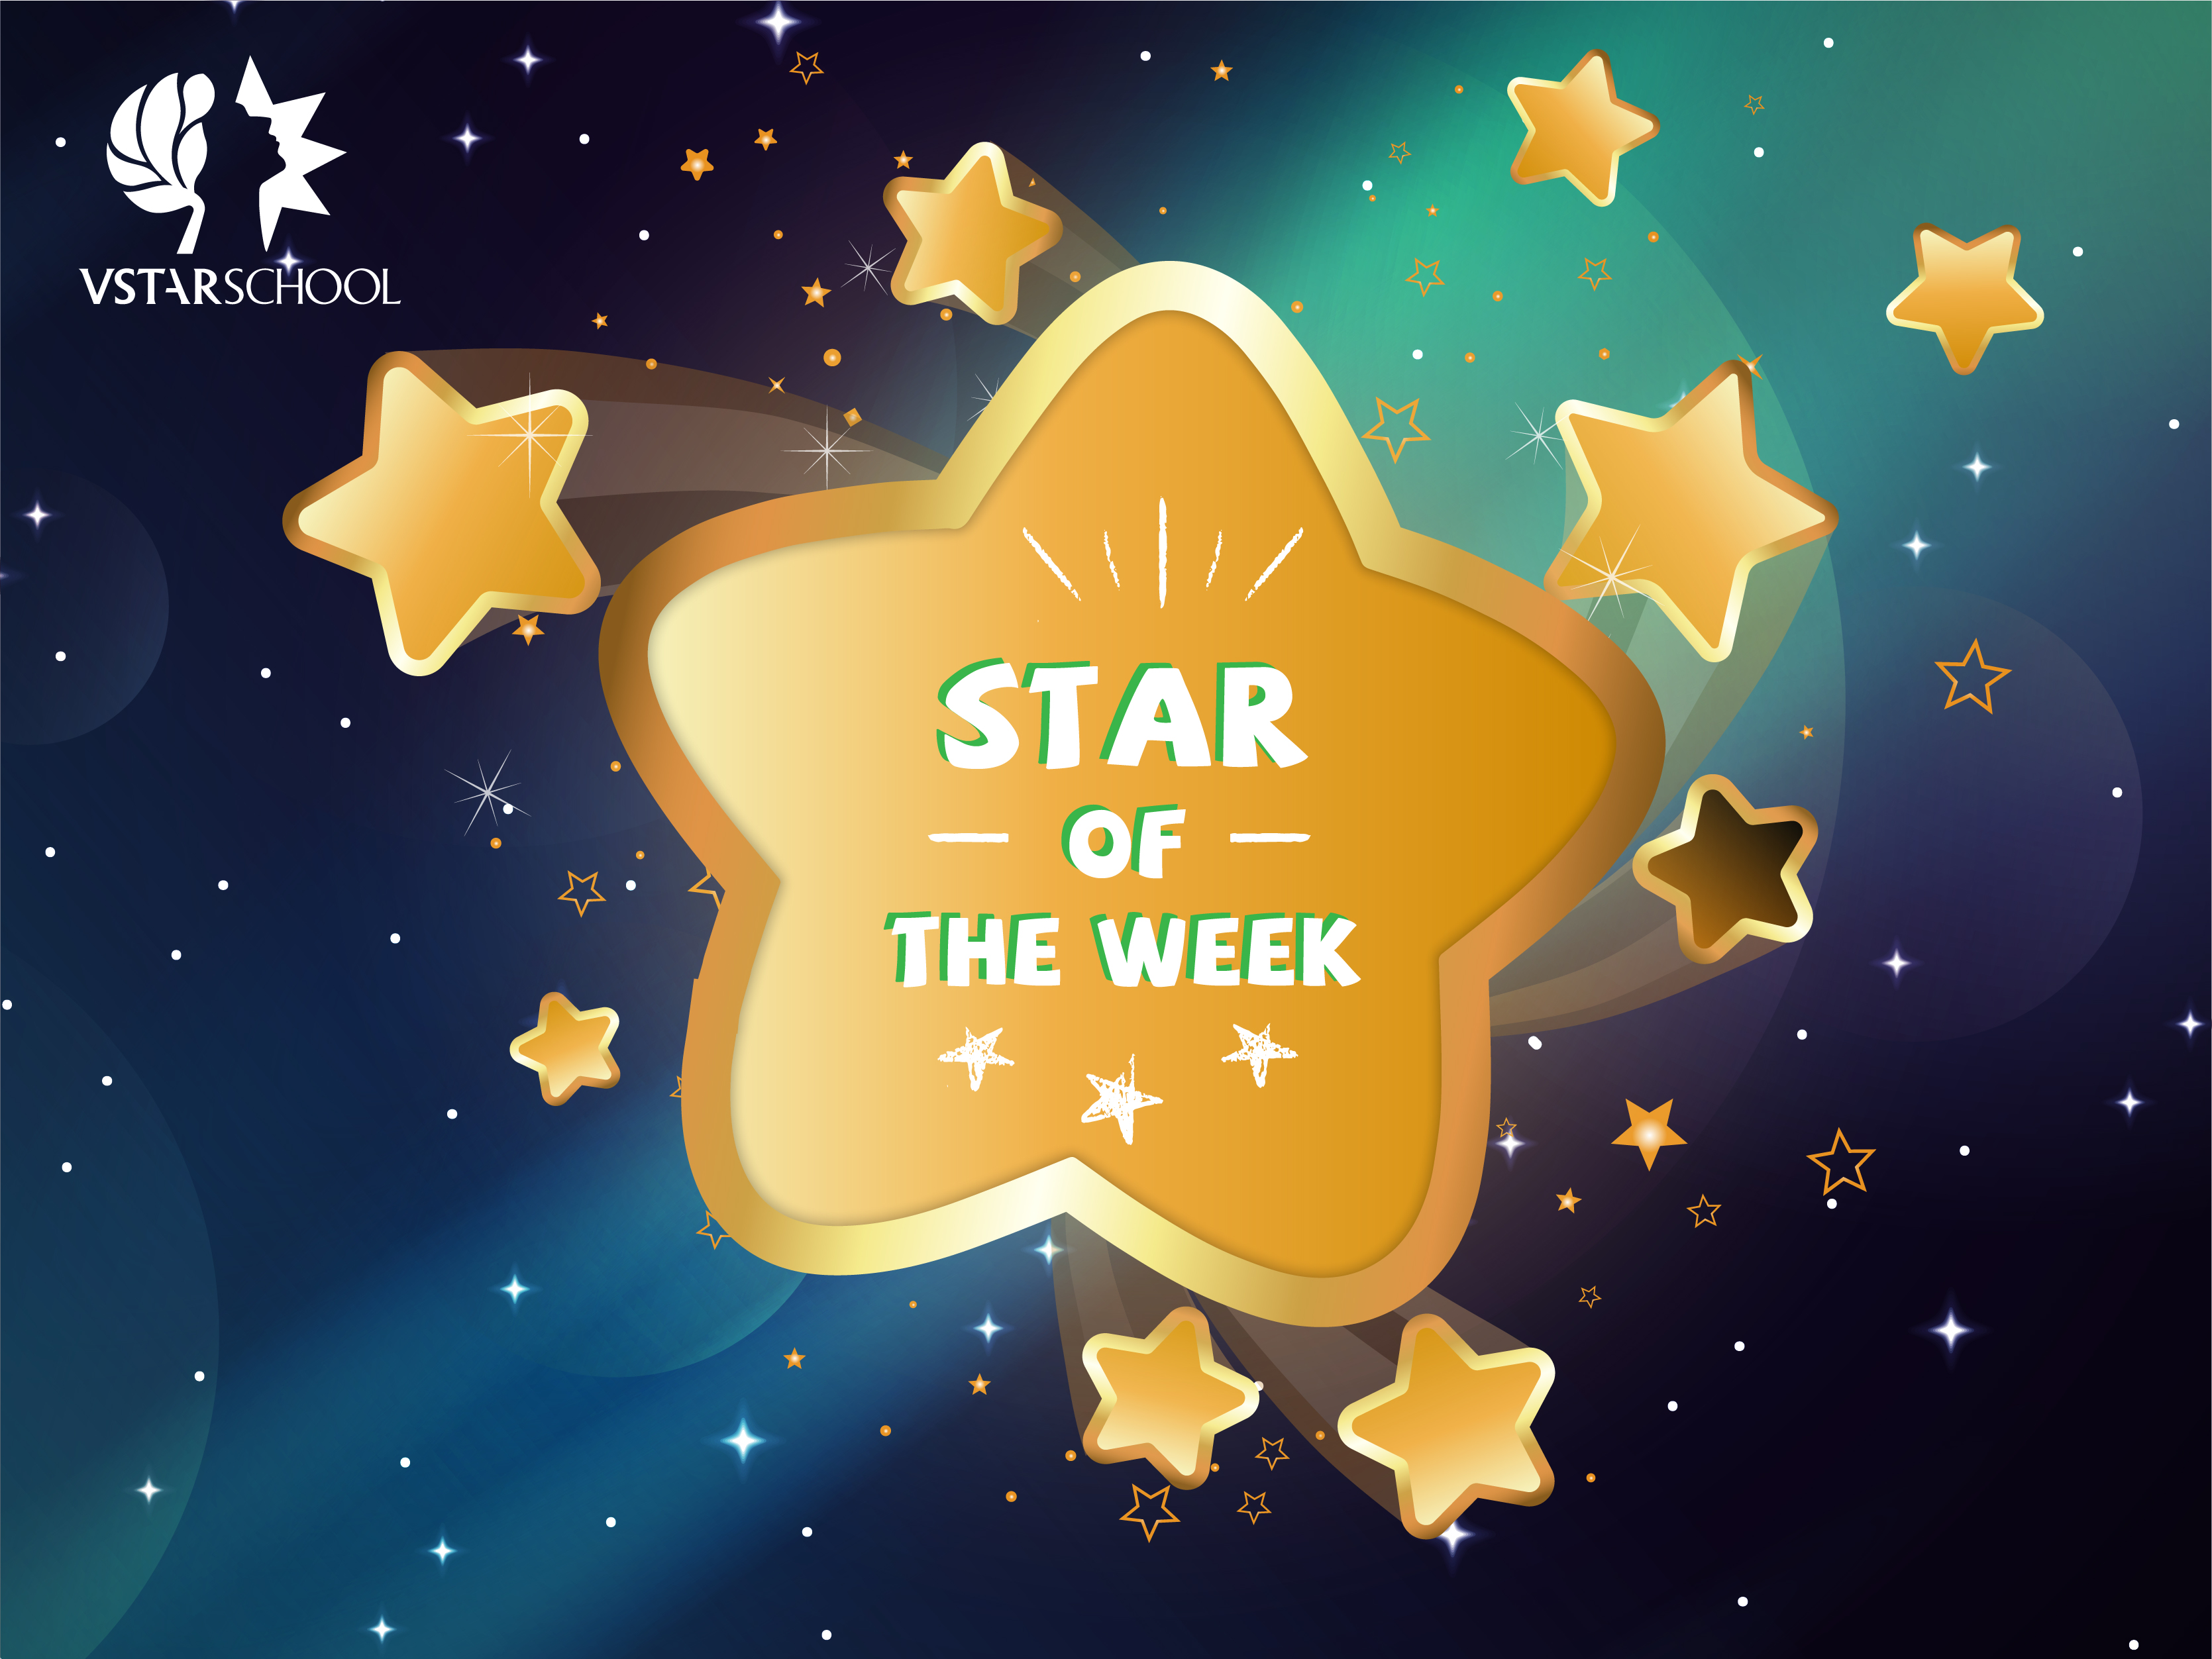 STAR OF THE WEEK TUẦN 2 - 06/2020